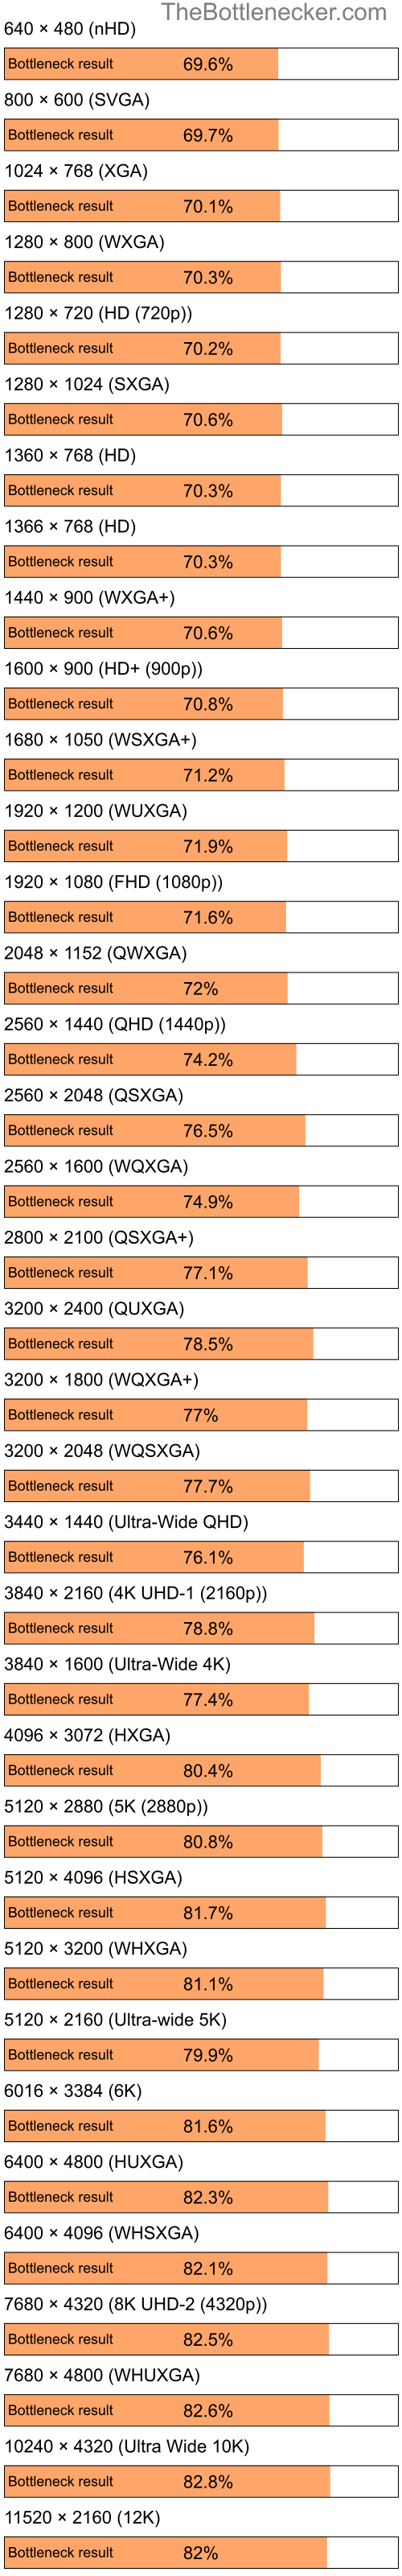 Bottleneck results by resolution for Intel Pentium 4 and AMD Radeon X1300 in General Tasks